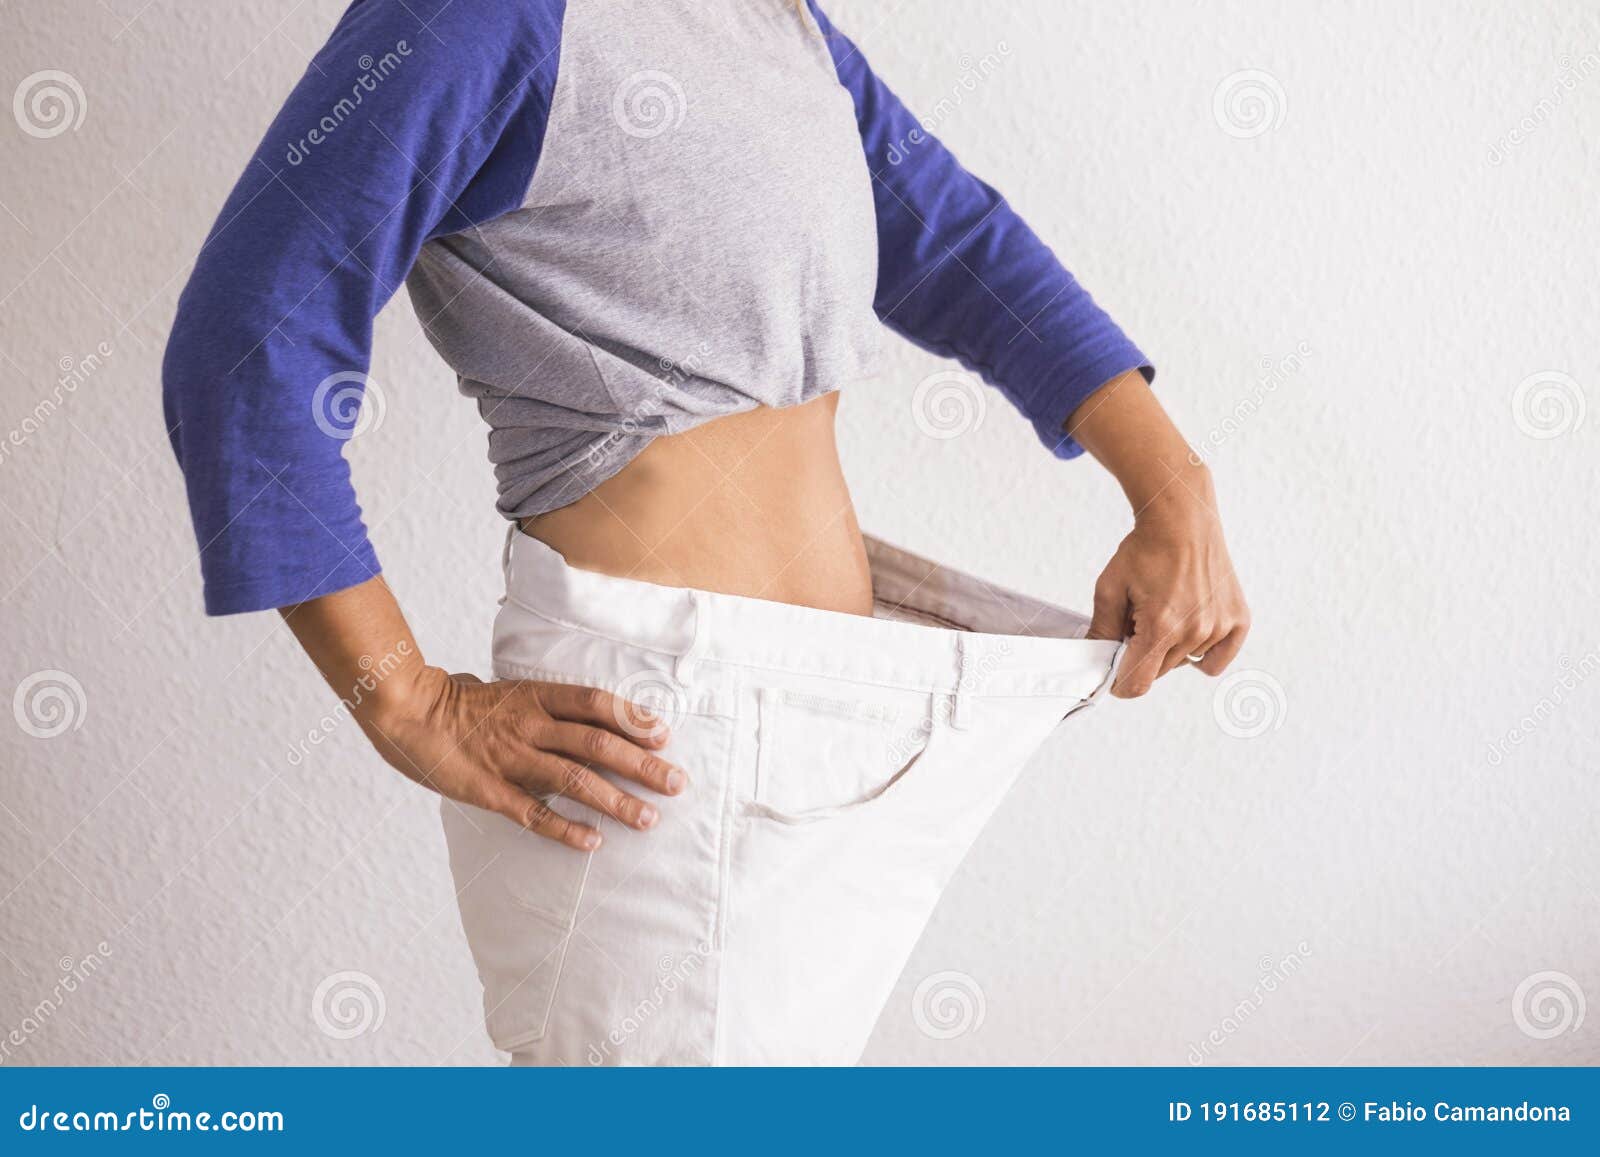 beautiful woman showing her old big pantalon after losing weight ah home - fitness at home and working to stay better with